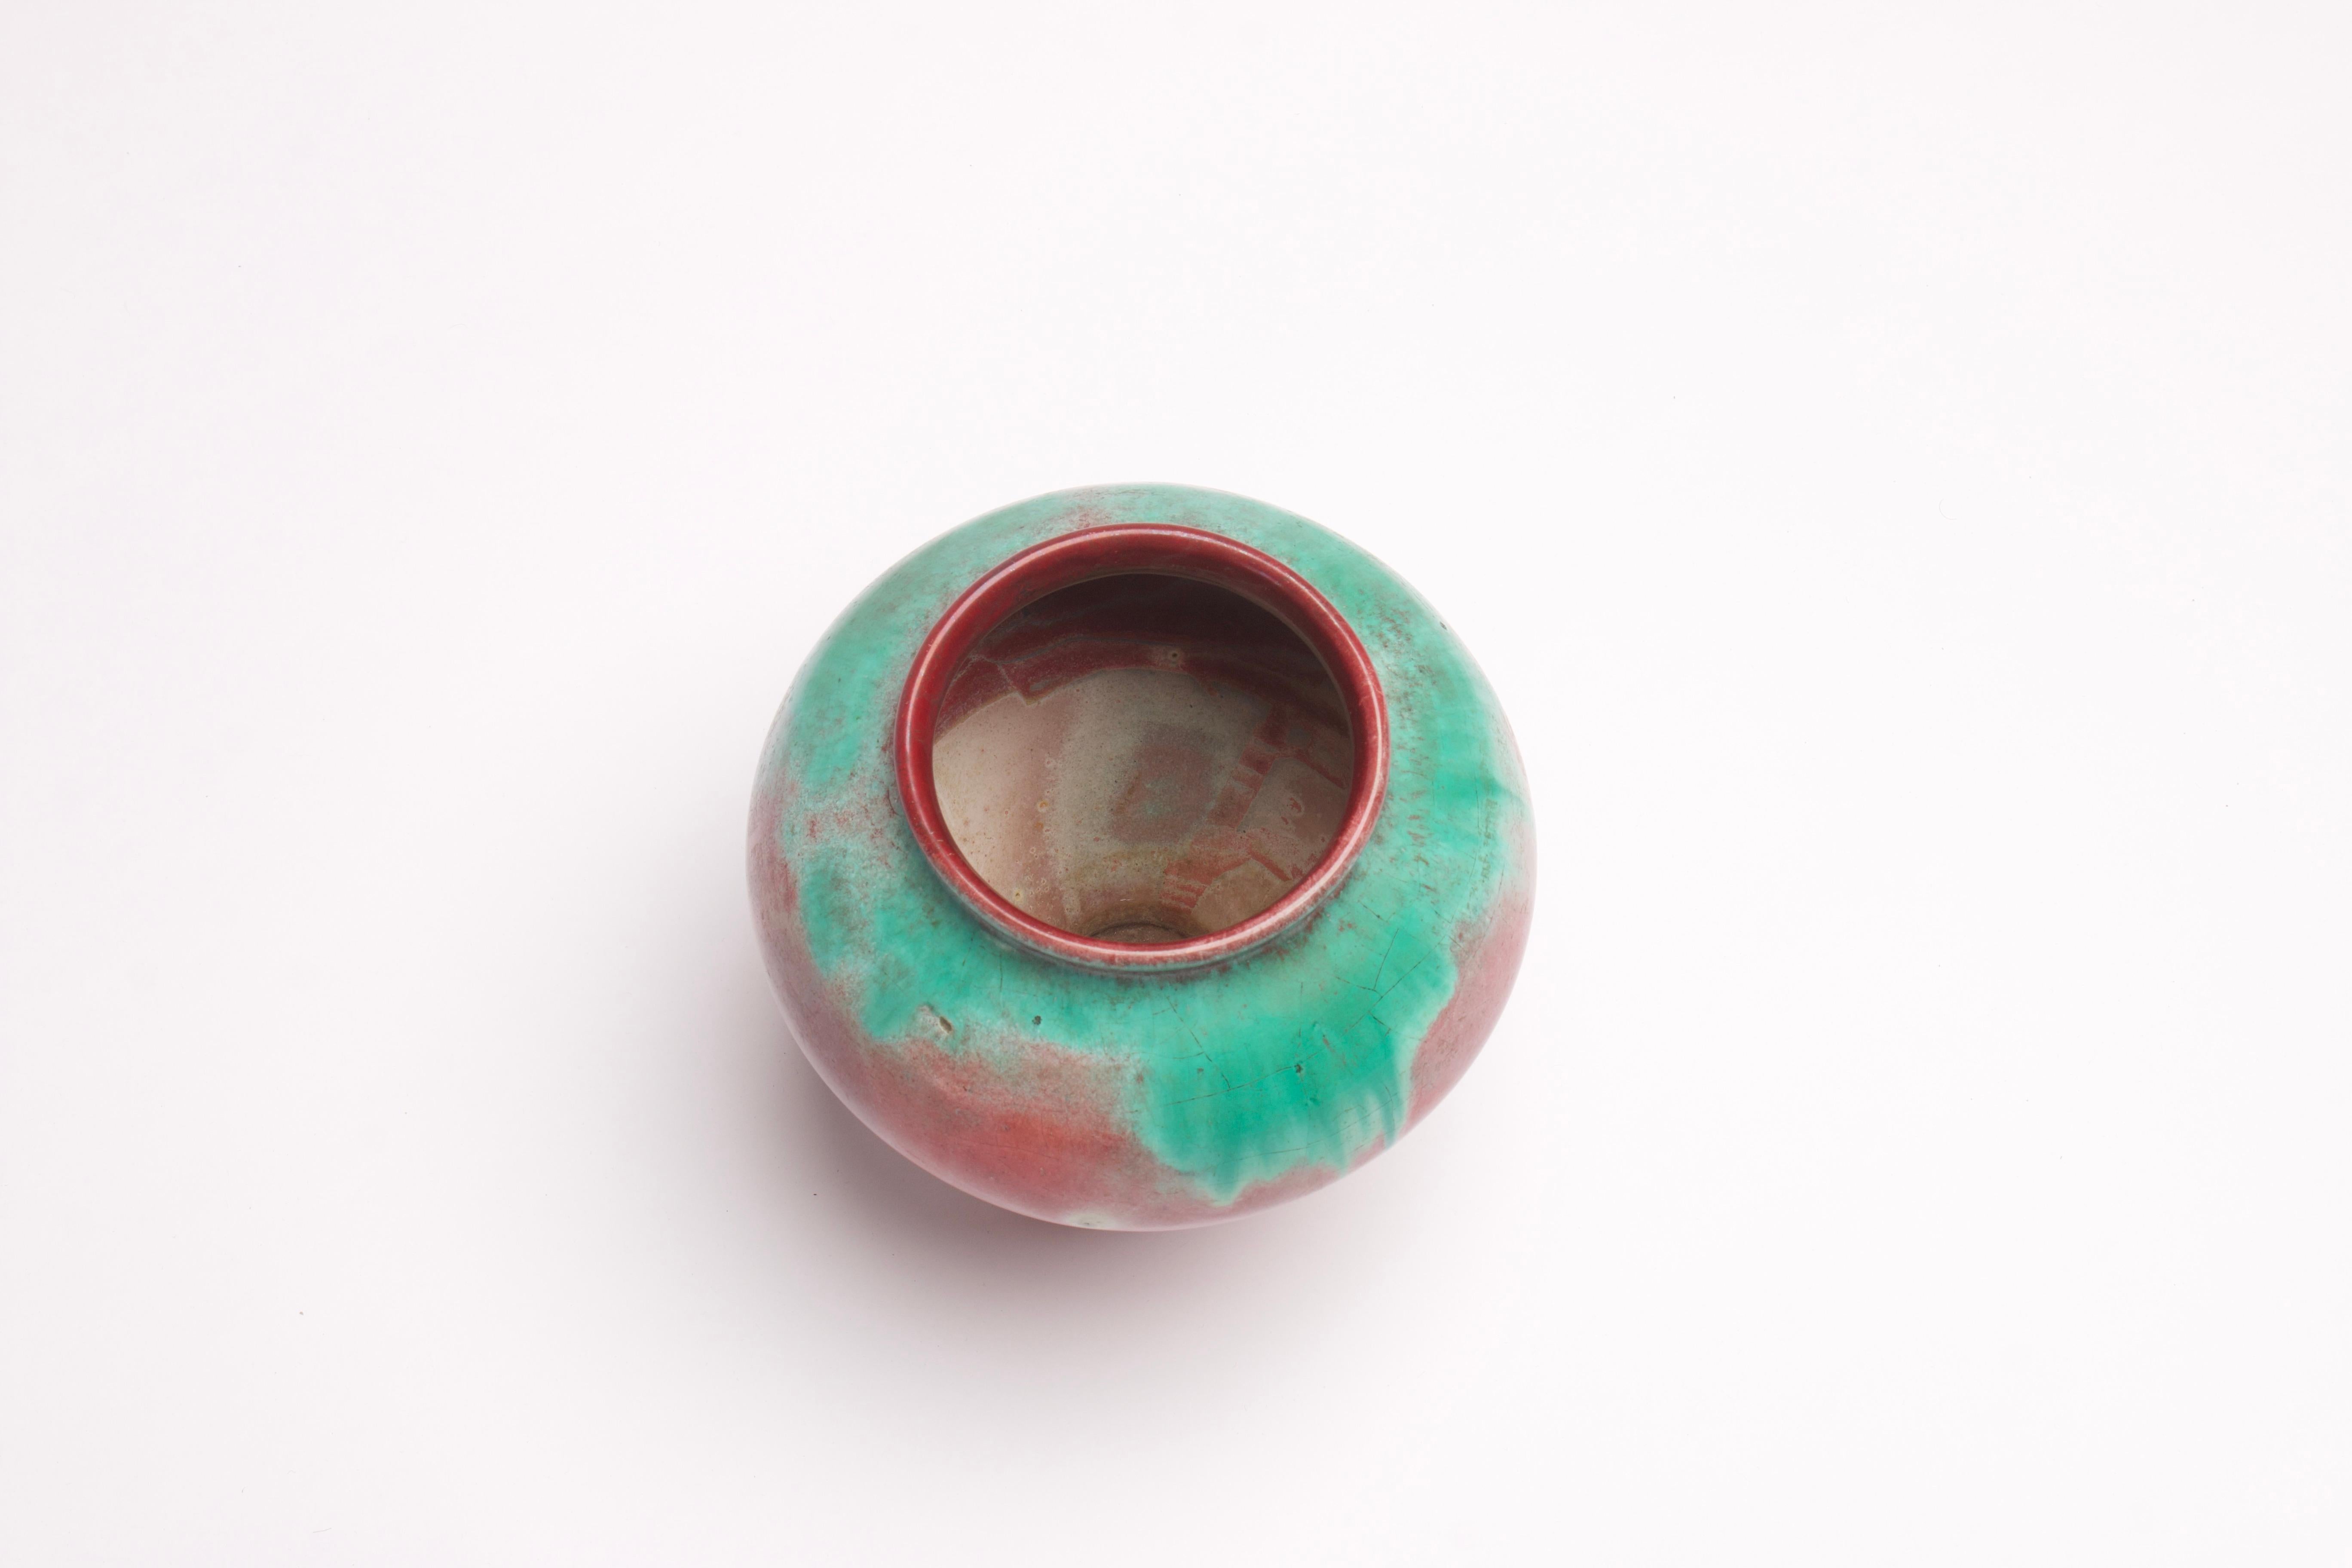 Glazed Danish earthenware vase decorated with green and red luster glaze For Sale